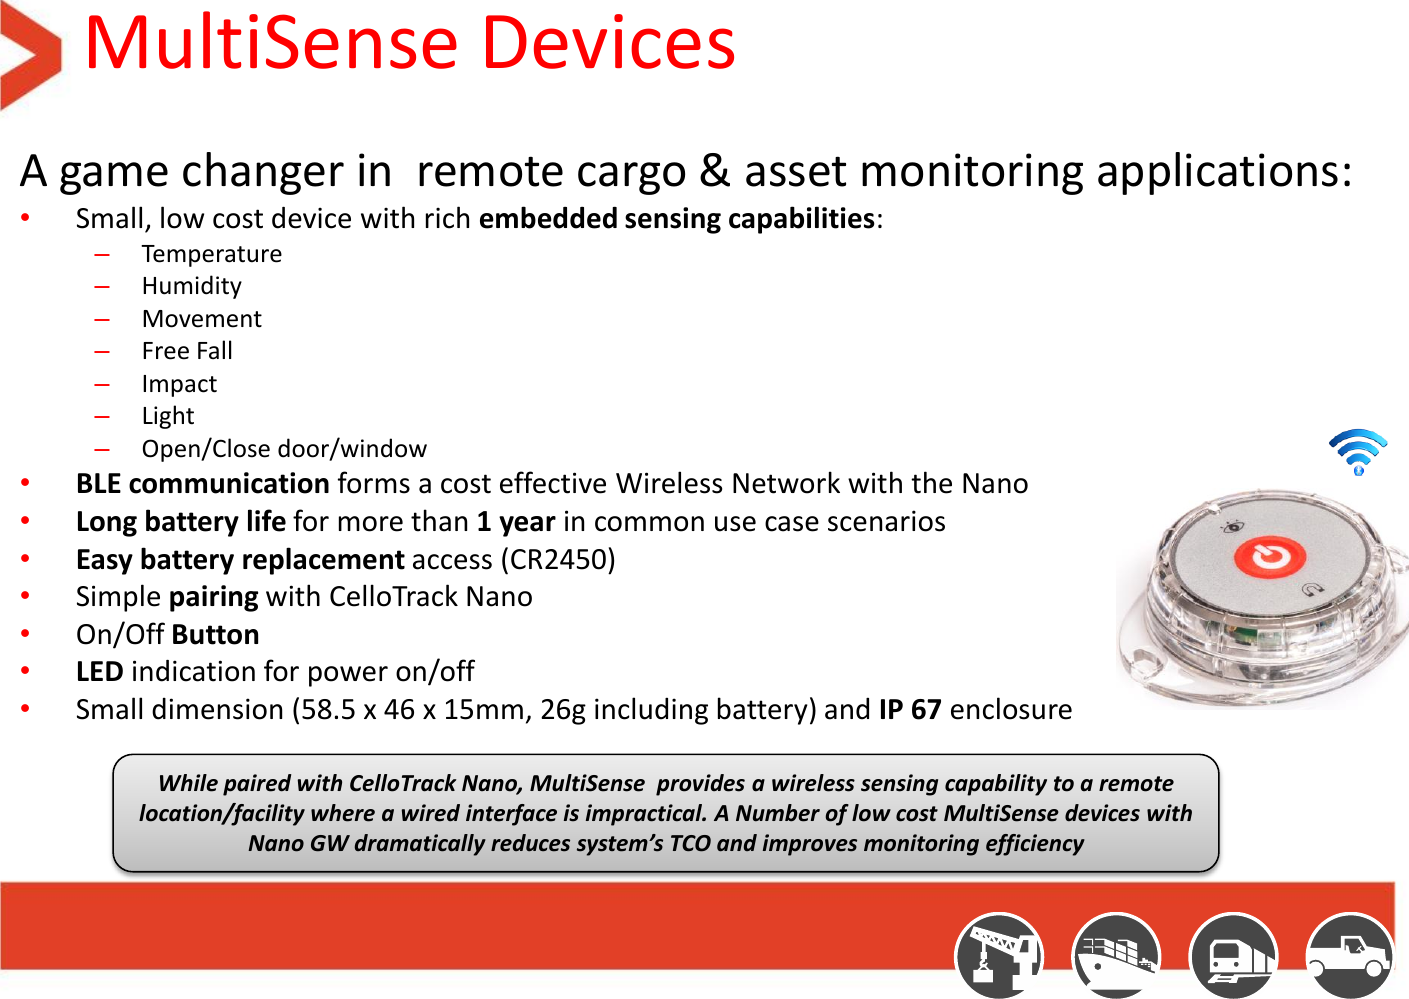 MultiSense Devices A game changer in  remote cargo &amp; asset monitoring applications:  •Small, low cost device with rich embedded sensing capabilities: –Temperature –Humidity  –Movement –Free Fall –Impact –Light –Open/Close door/window •BLE communication forms a cost effective Wireless Network with the Nano •Long battery life for more than 1 year in common use case scenarios •Easy battery replacement access (CR2450) •Simple pairing with CelloTrack Nano •On/Off Button •LED indication for power on/off •Small dimension (58.5 x 46 x 15mm, 26g including battery) and IP 67 enclosure   While paired with CelloTrack Nano, MultiSense  provides a wireless sensing capability to a remote location/facility where a wired interface is impractical. A Number of low cost MultiSense devices with Nano GW dramatically reduces system’s TCO and improves monitoring efficiency 